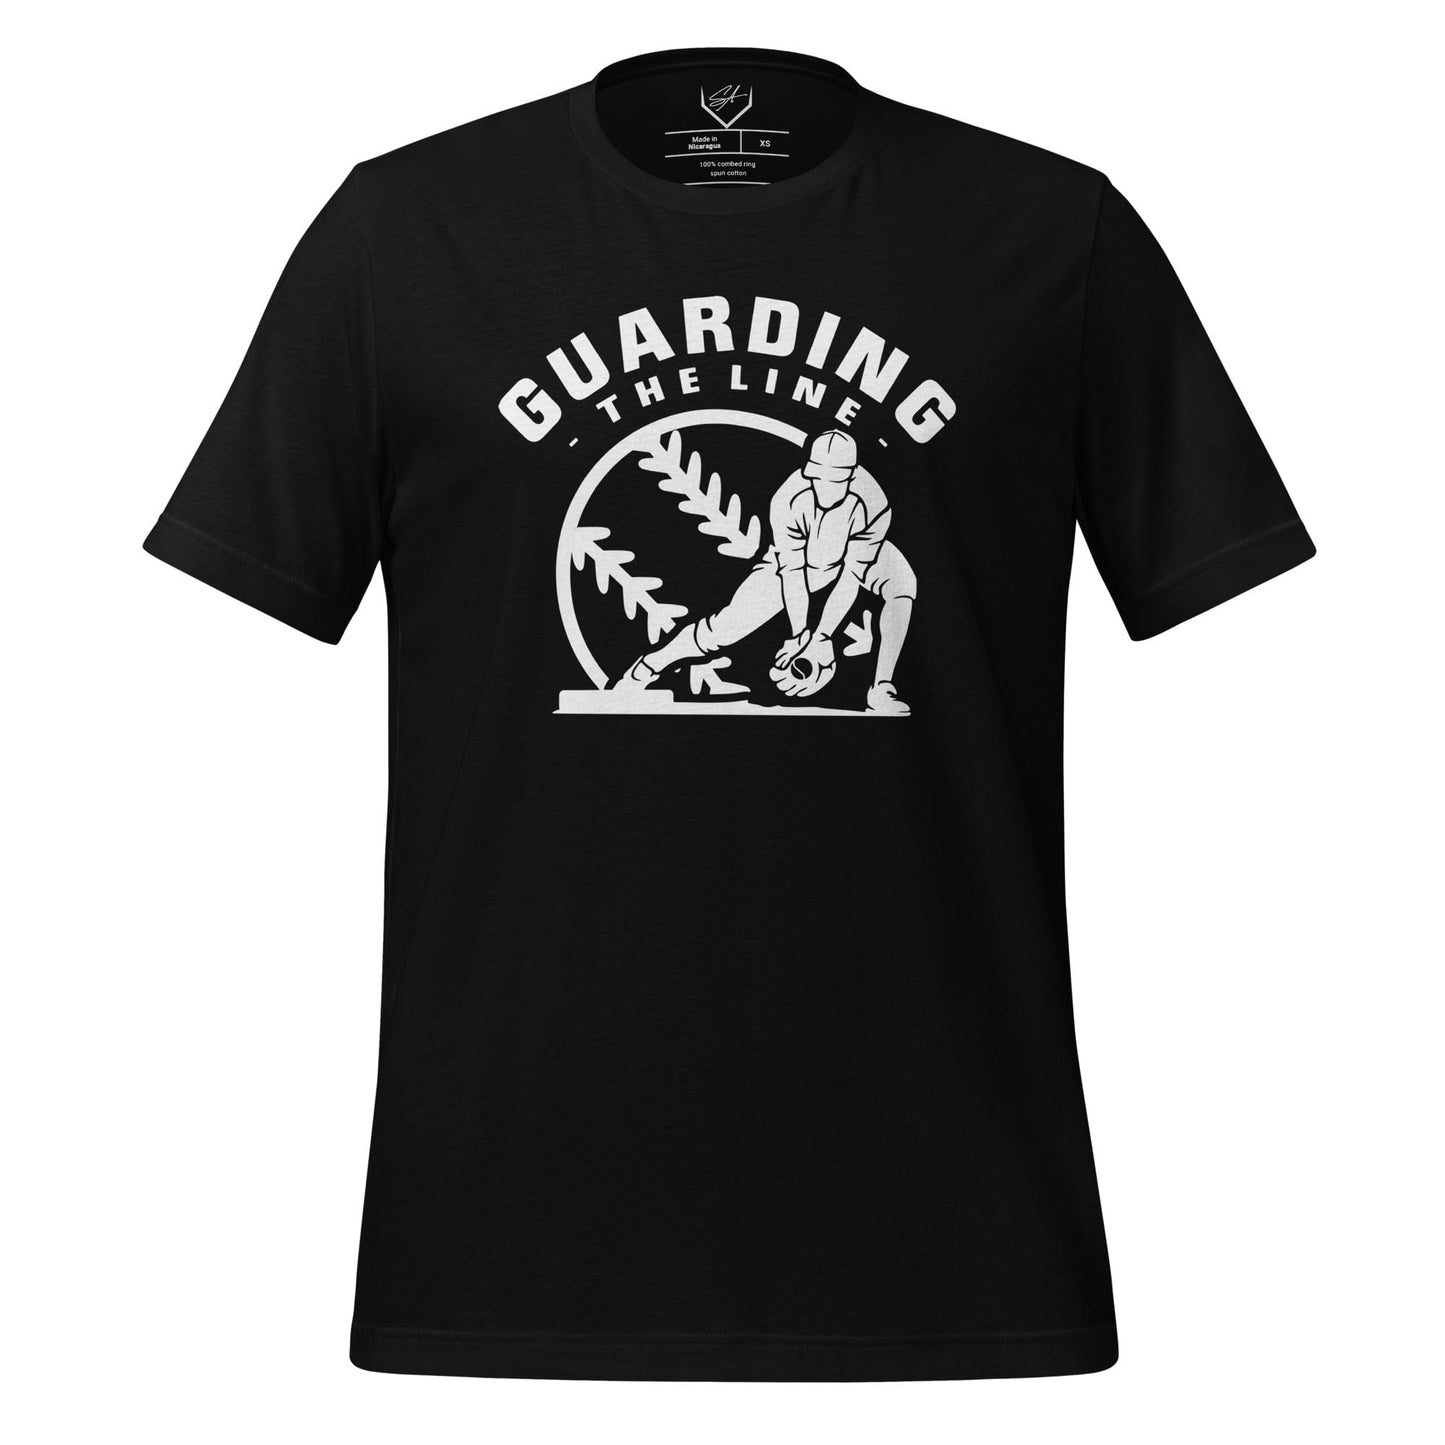 Guarding The Line - Adult Tee